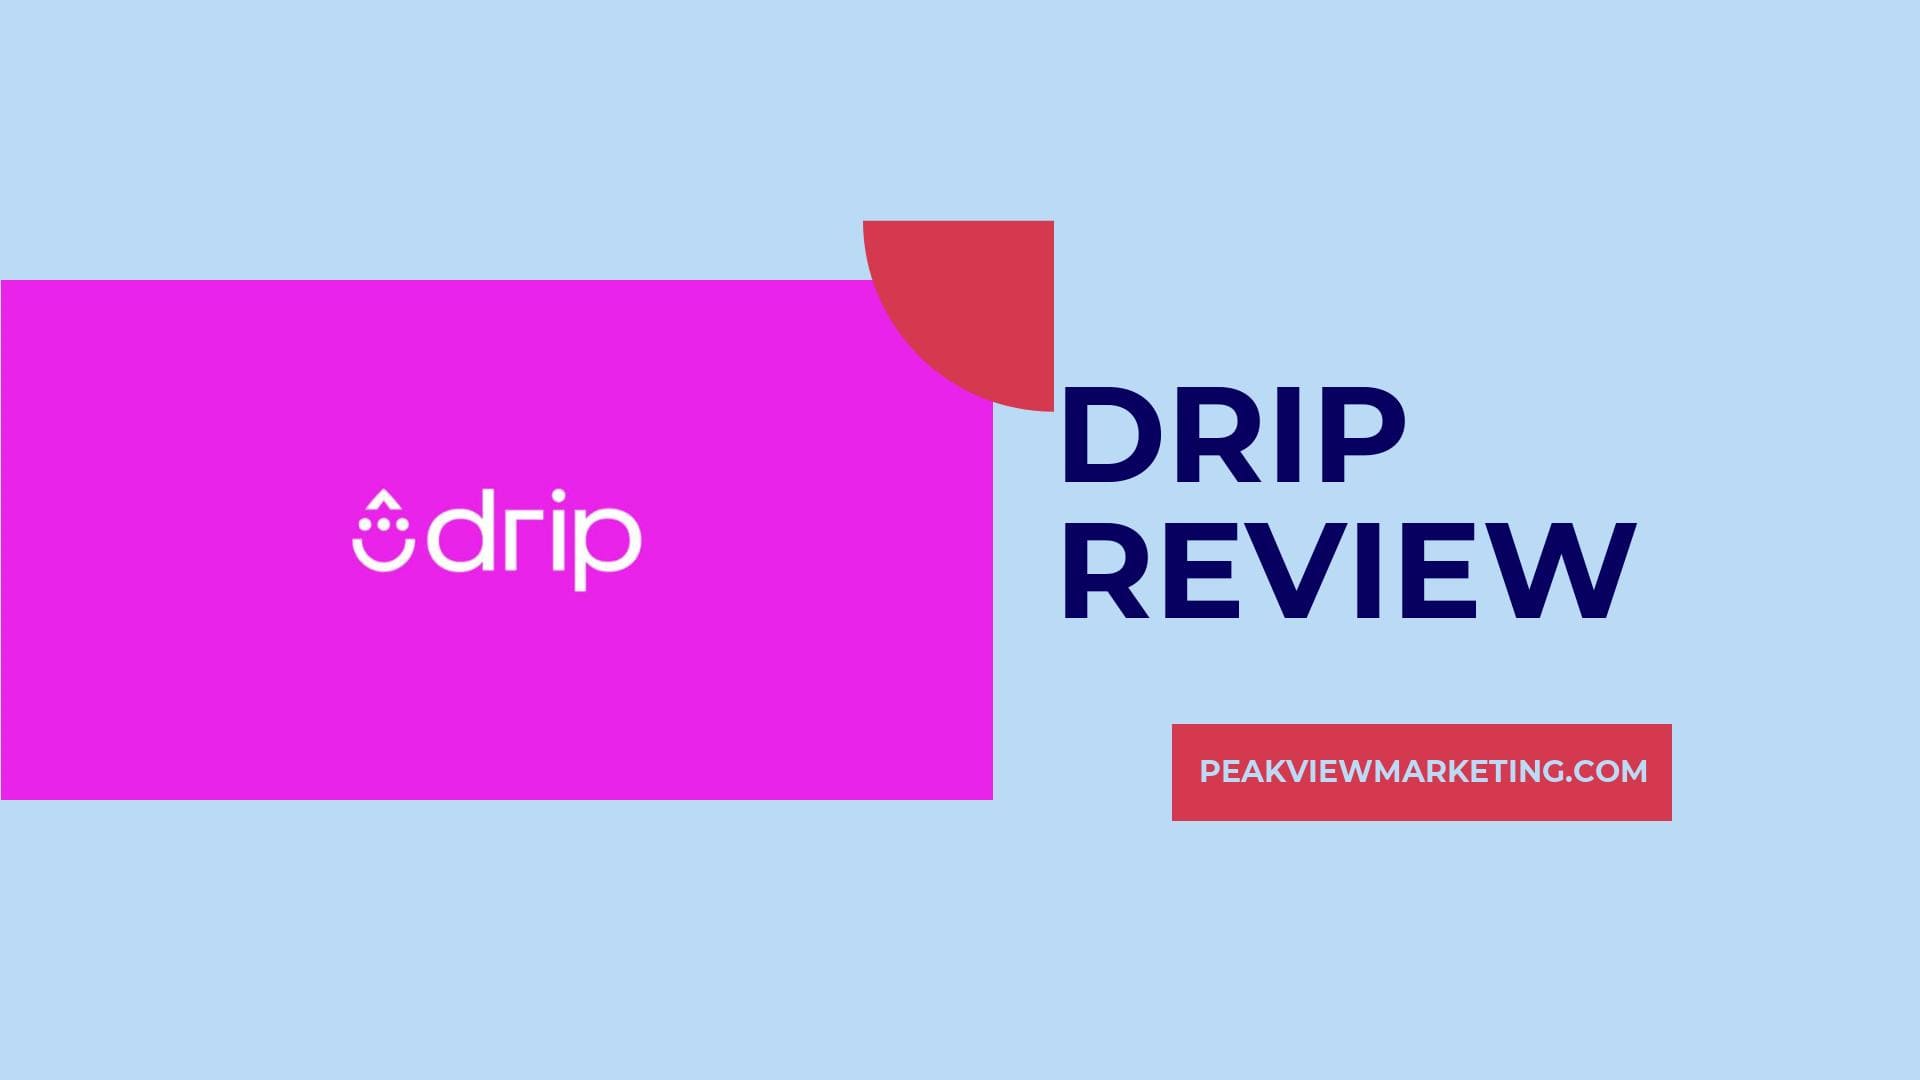 Drip Review Image